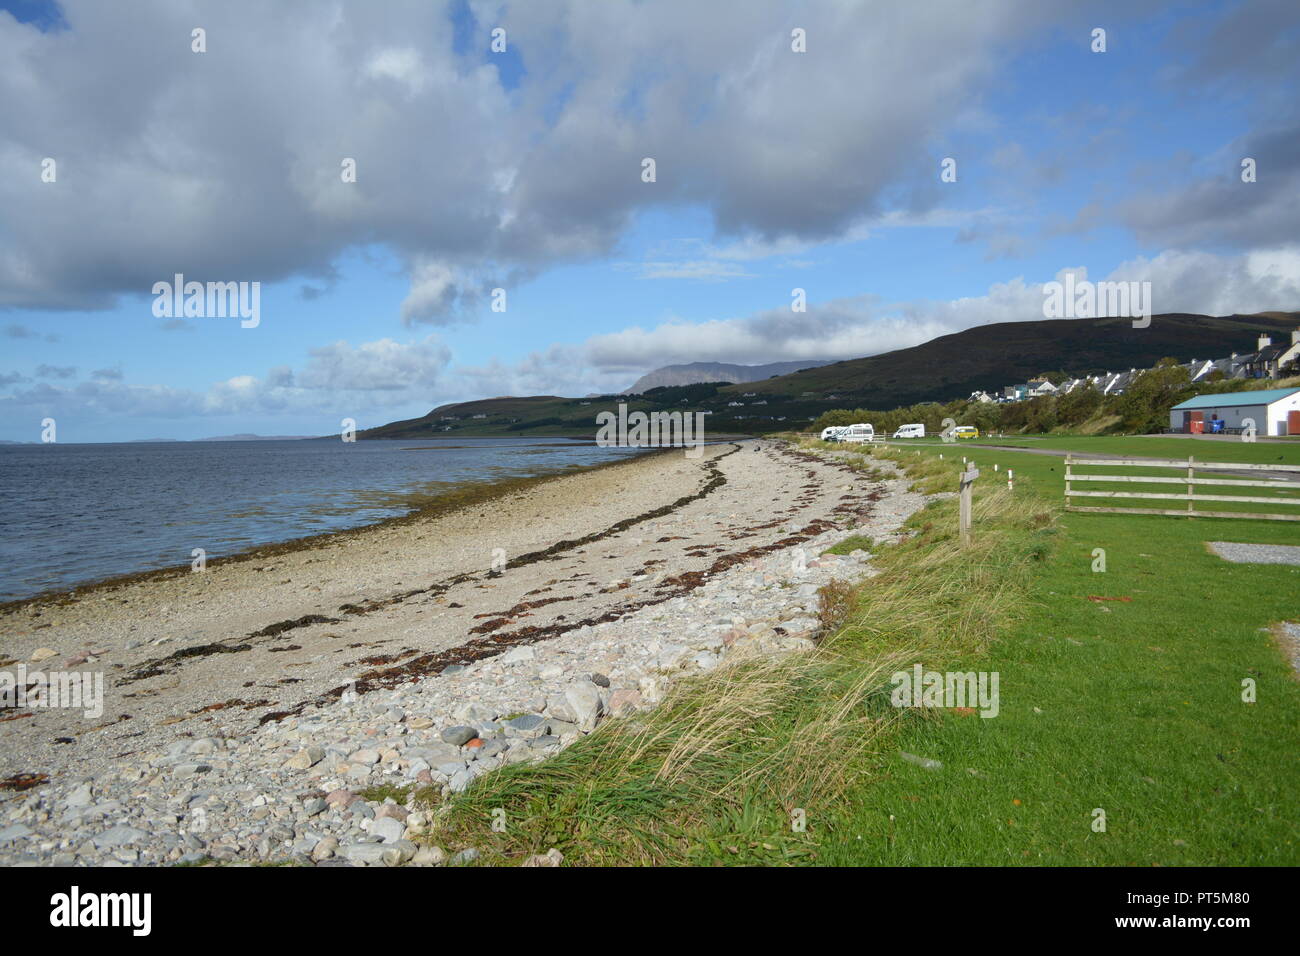 Deserted pebble beach strewn with seaweed fronting Broomhill camp caravan site Ullapool Scotland UK with sea blue sky and clouds in the background Stock Photo